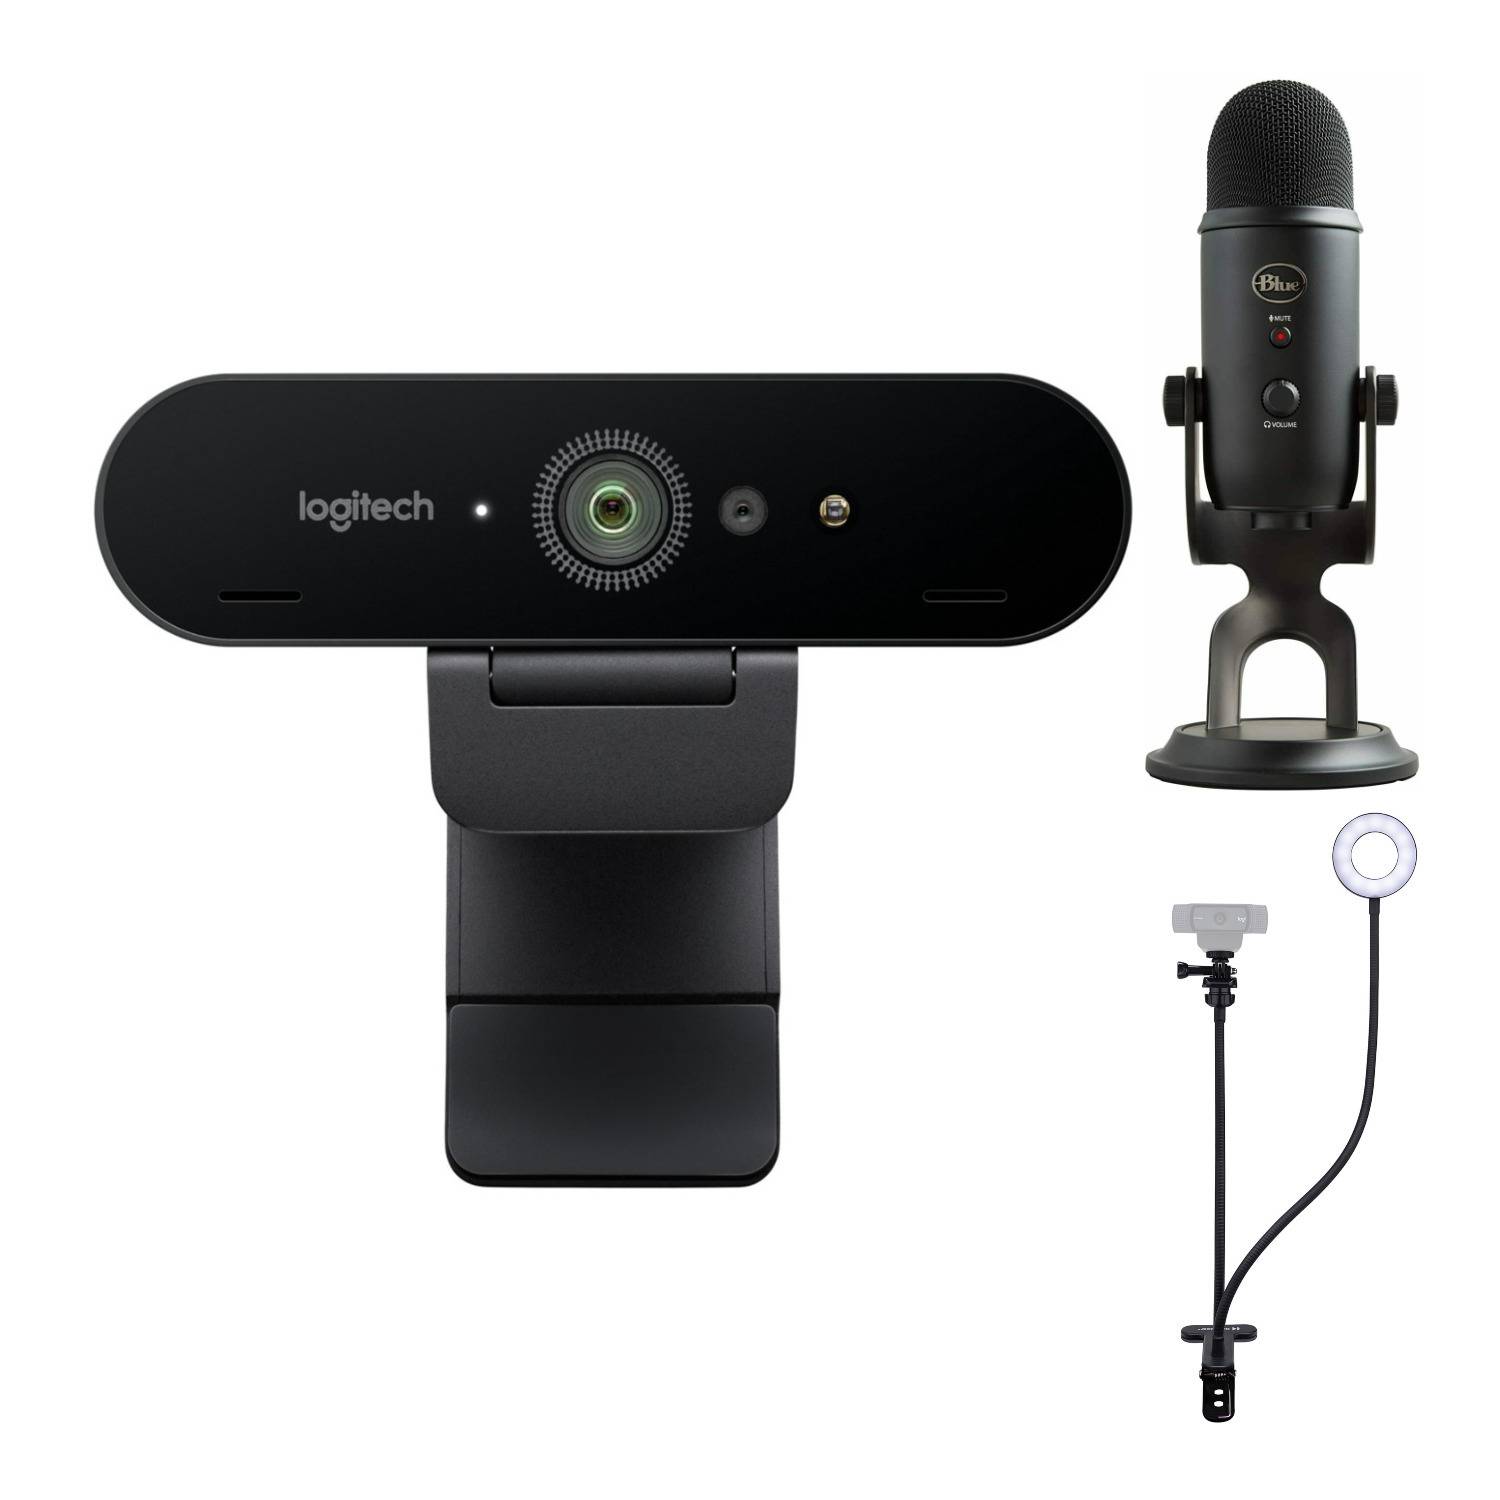 Logitech 4K Pro Webcam Bundle With Blue Microphones Yeti Blackout and Ring Light With Webcam Stand